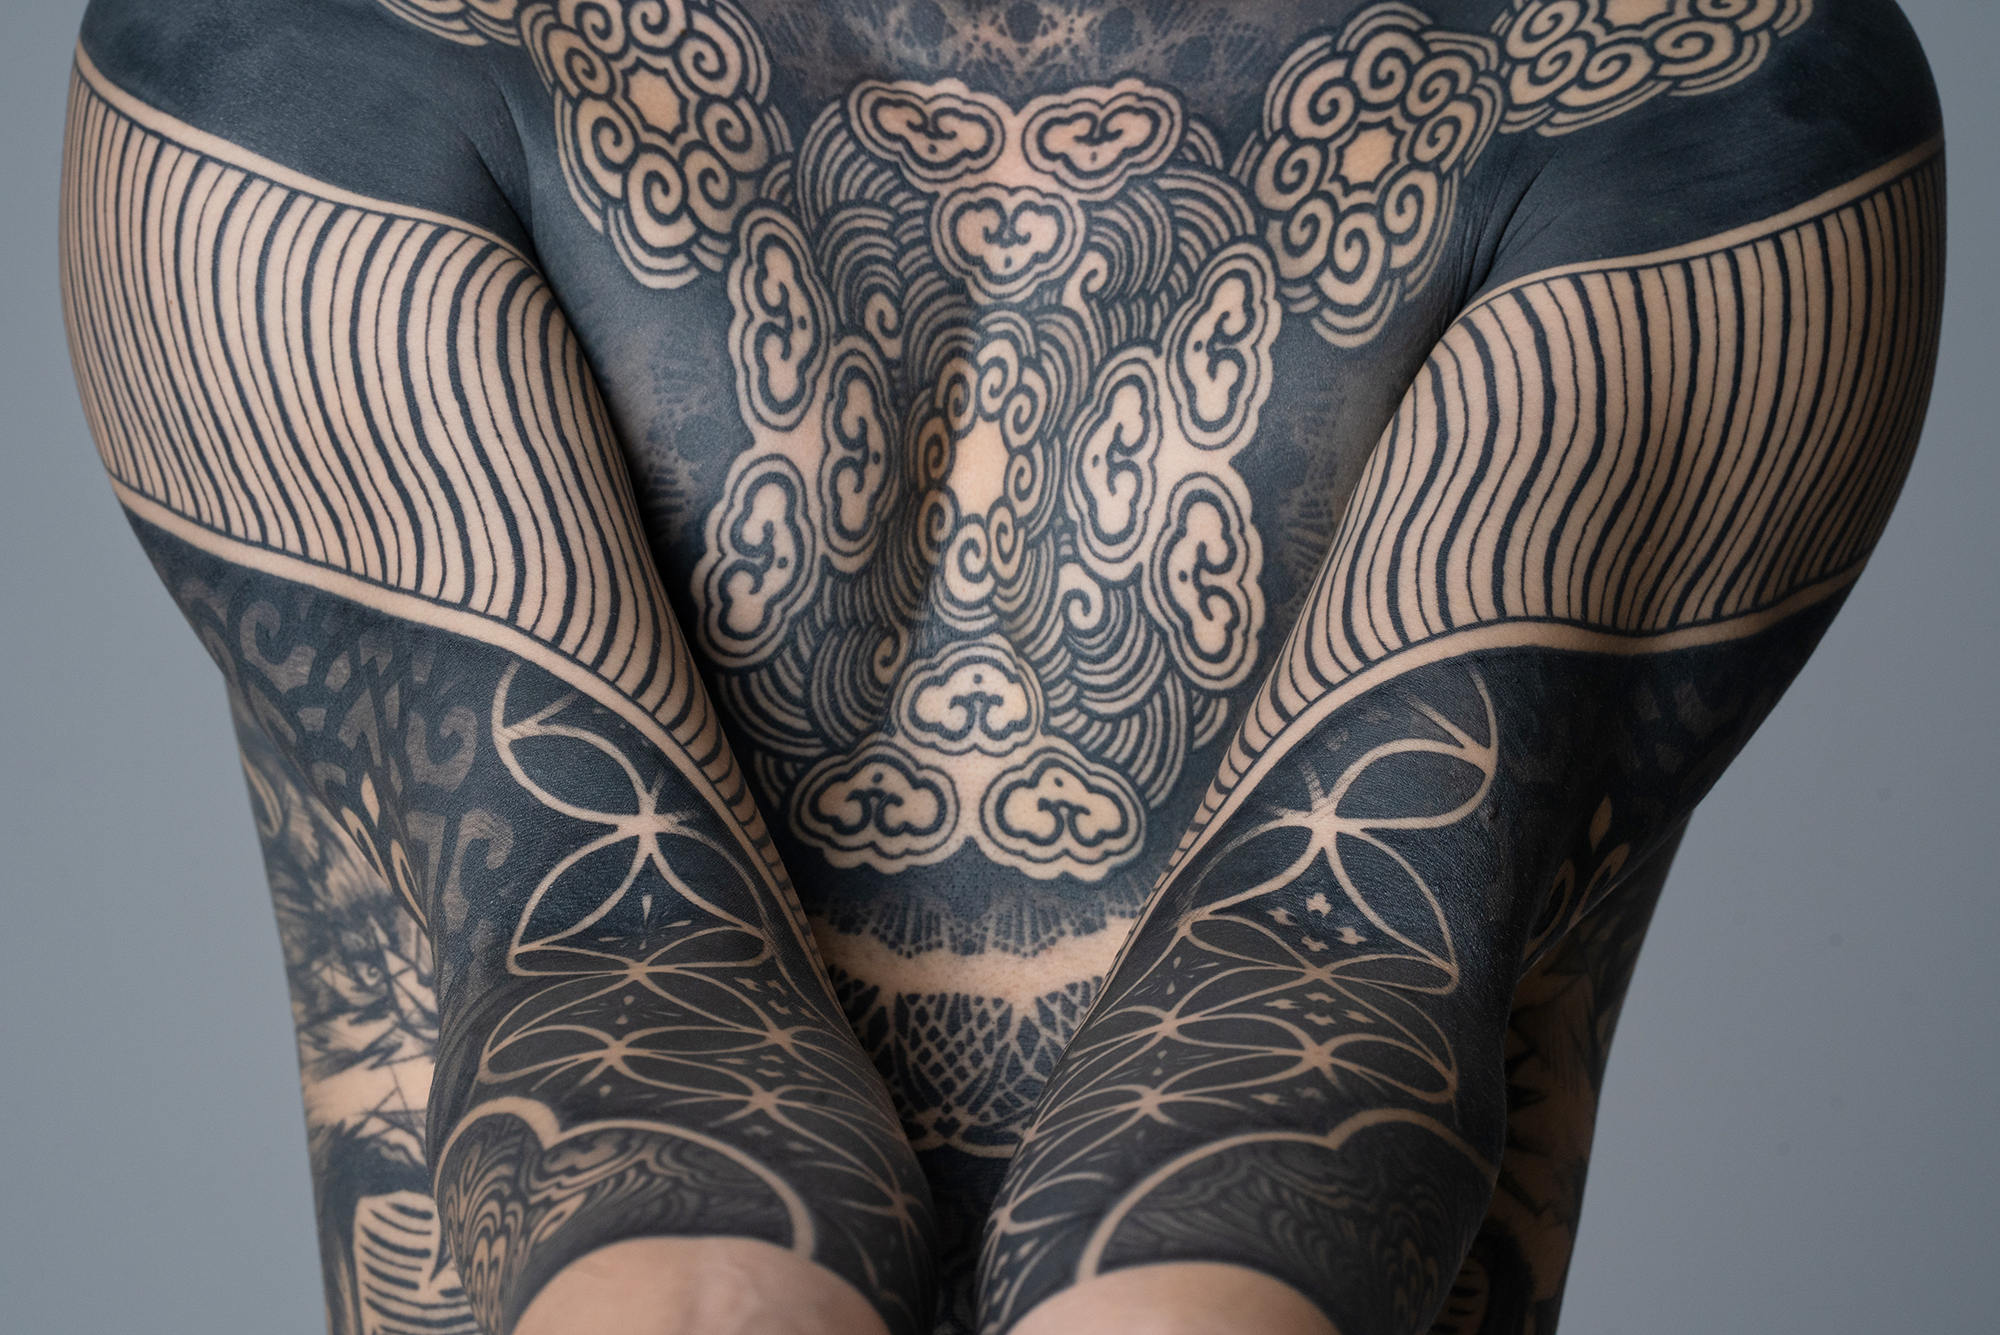 Ian Damien s torso artwork is noteworthy because of the use of subtle textures and dynamic patterns